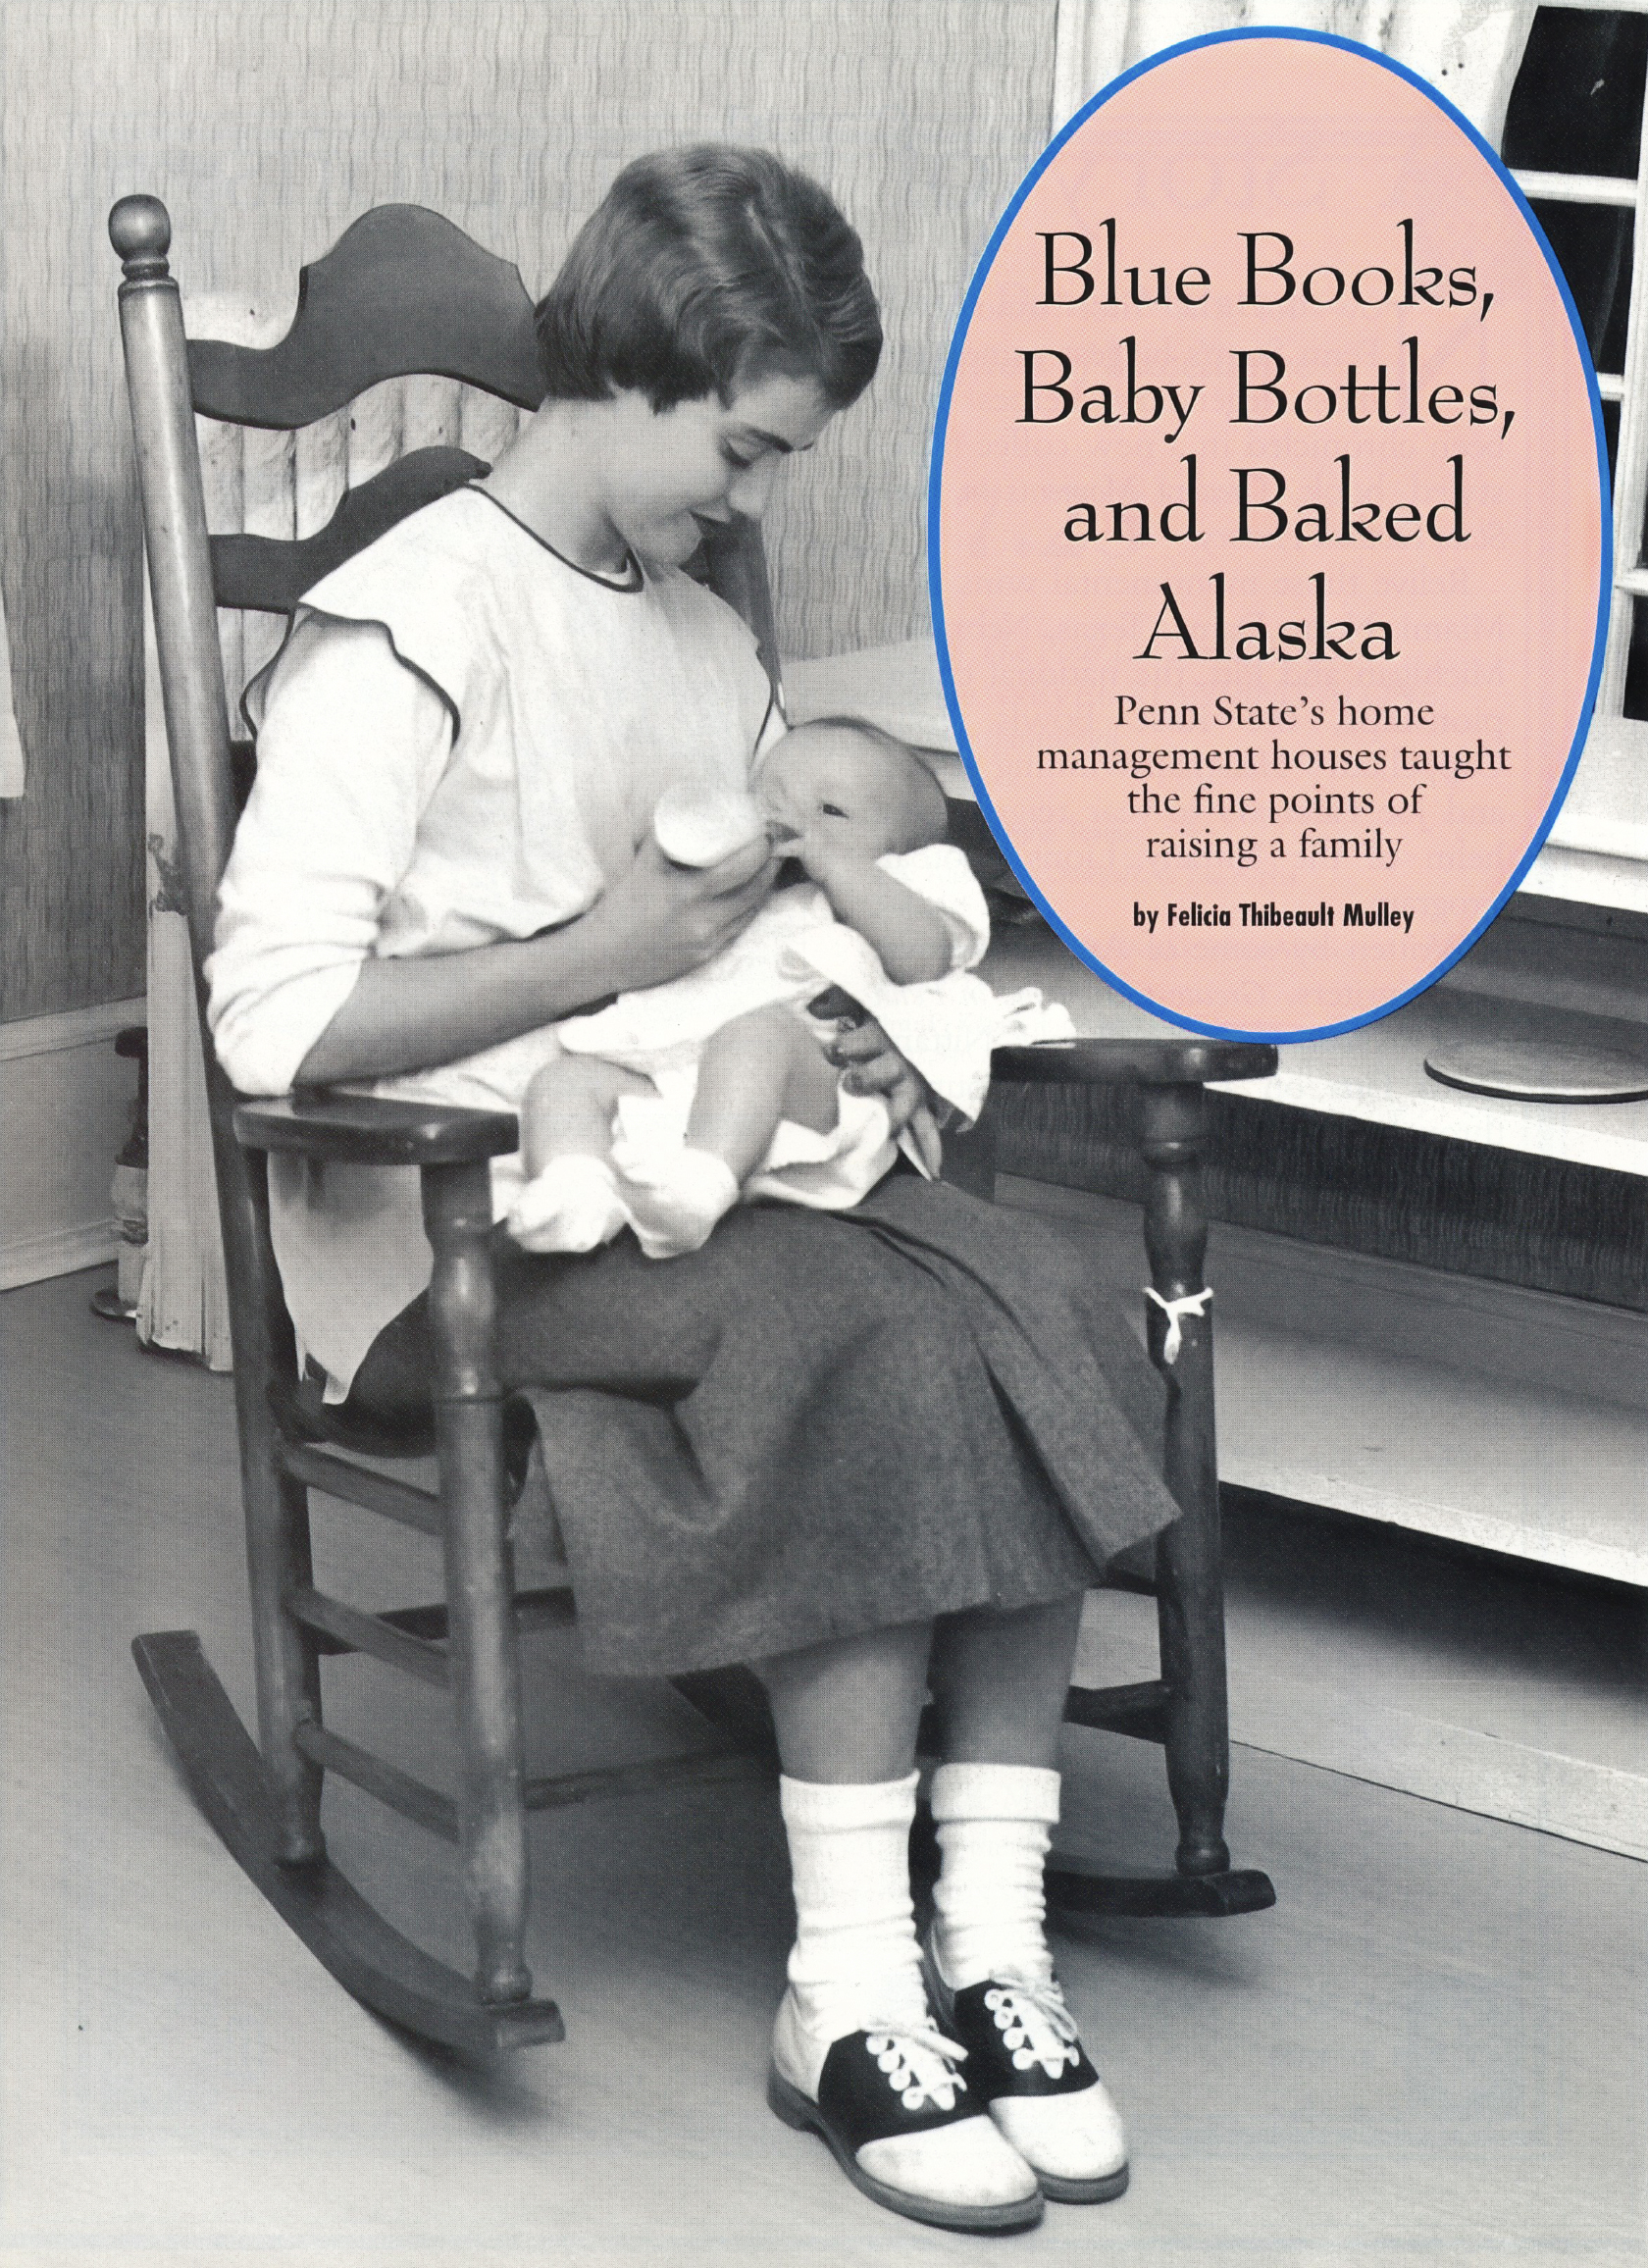 black and white photo of a woman sitting in a rocking chair feeding a bottle to a baby with article title in a pink circle, photo by Penn State University Archives